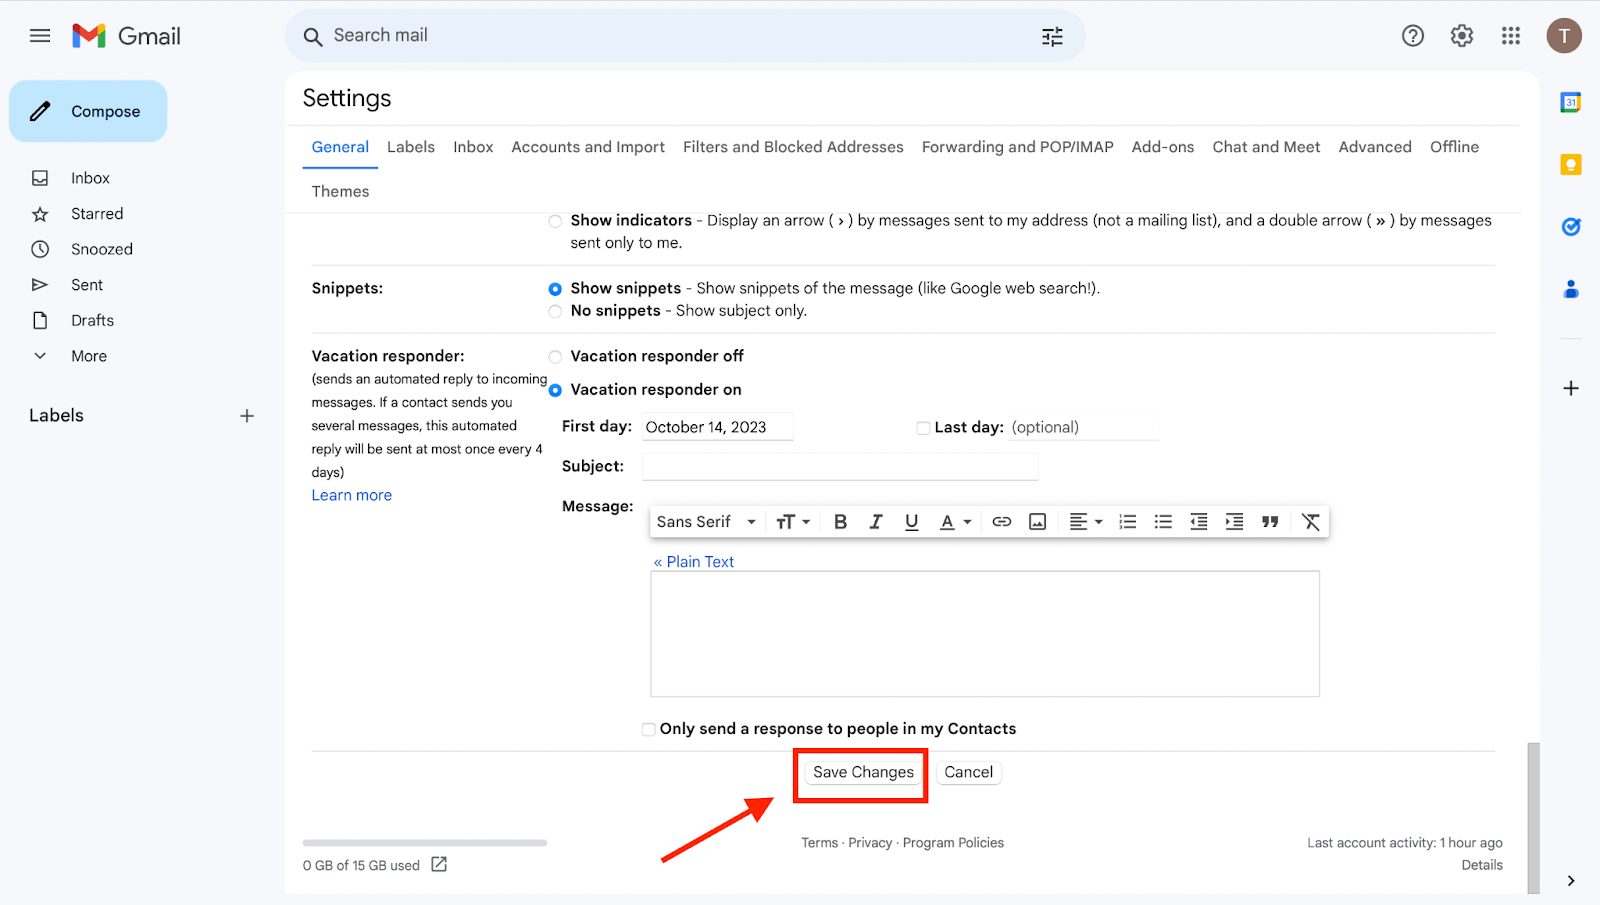 gmail settings screenshot with save changes highlighted